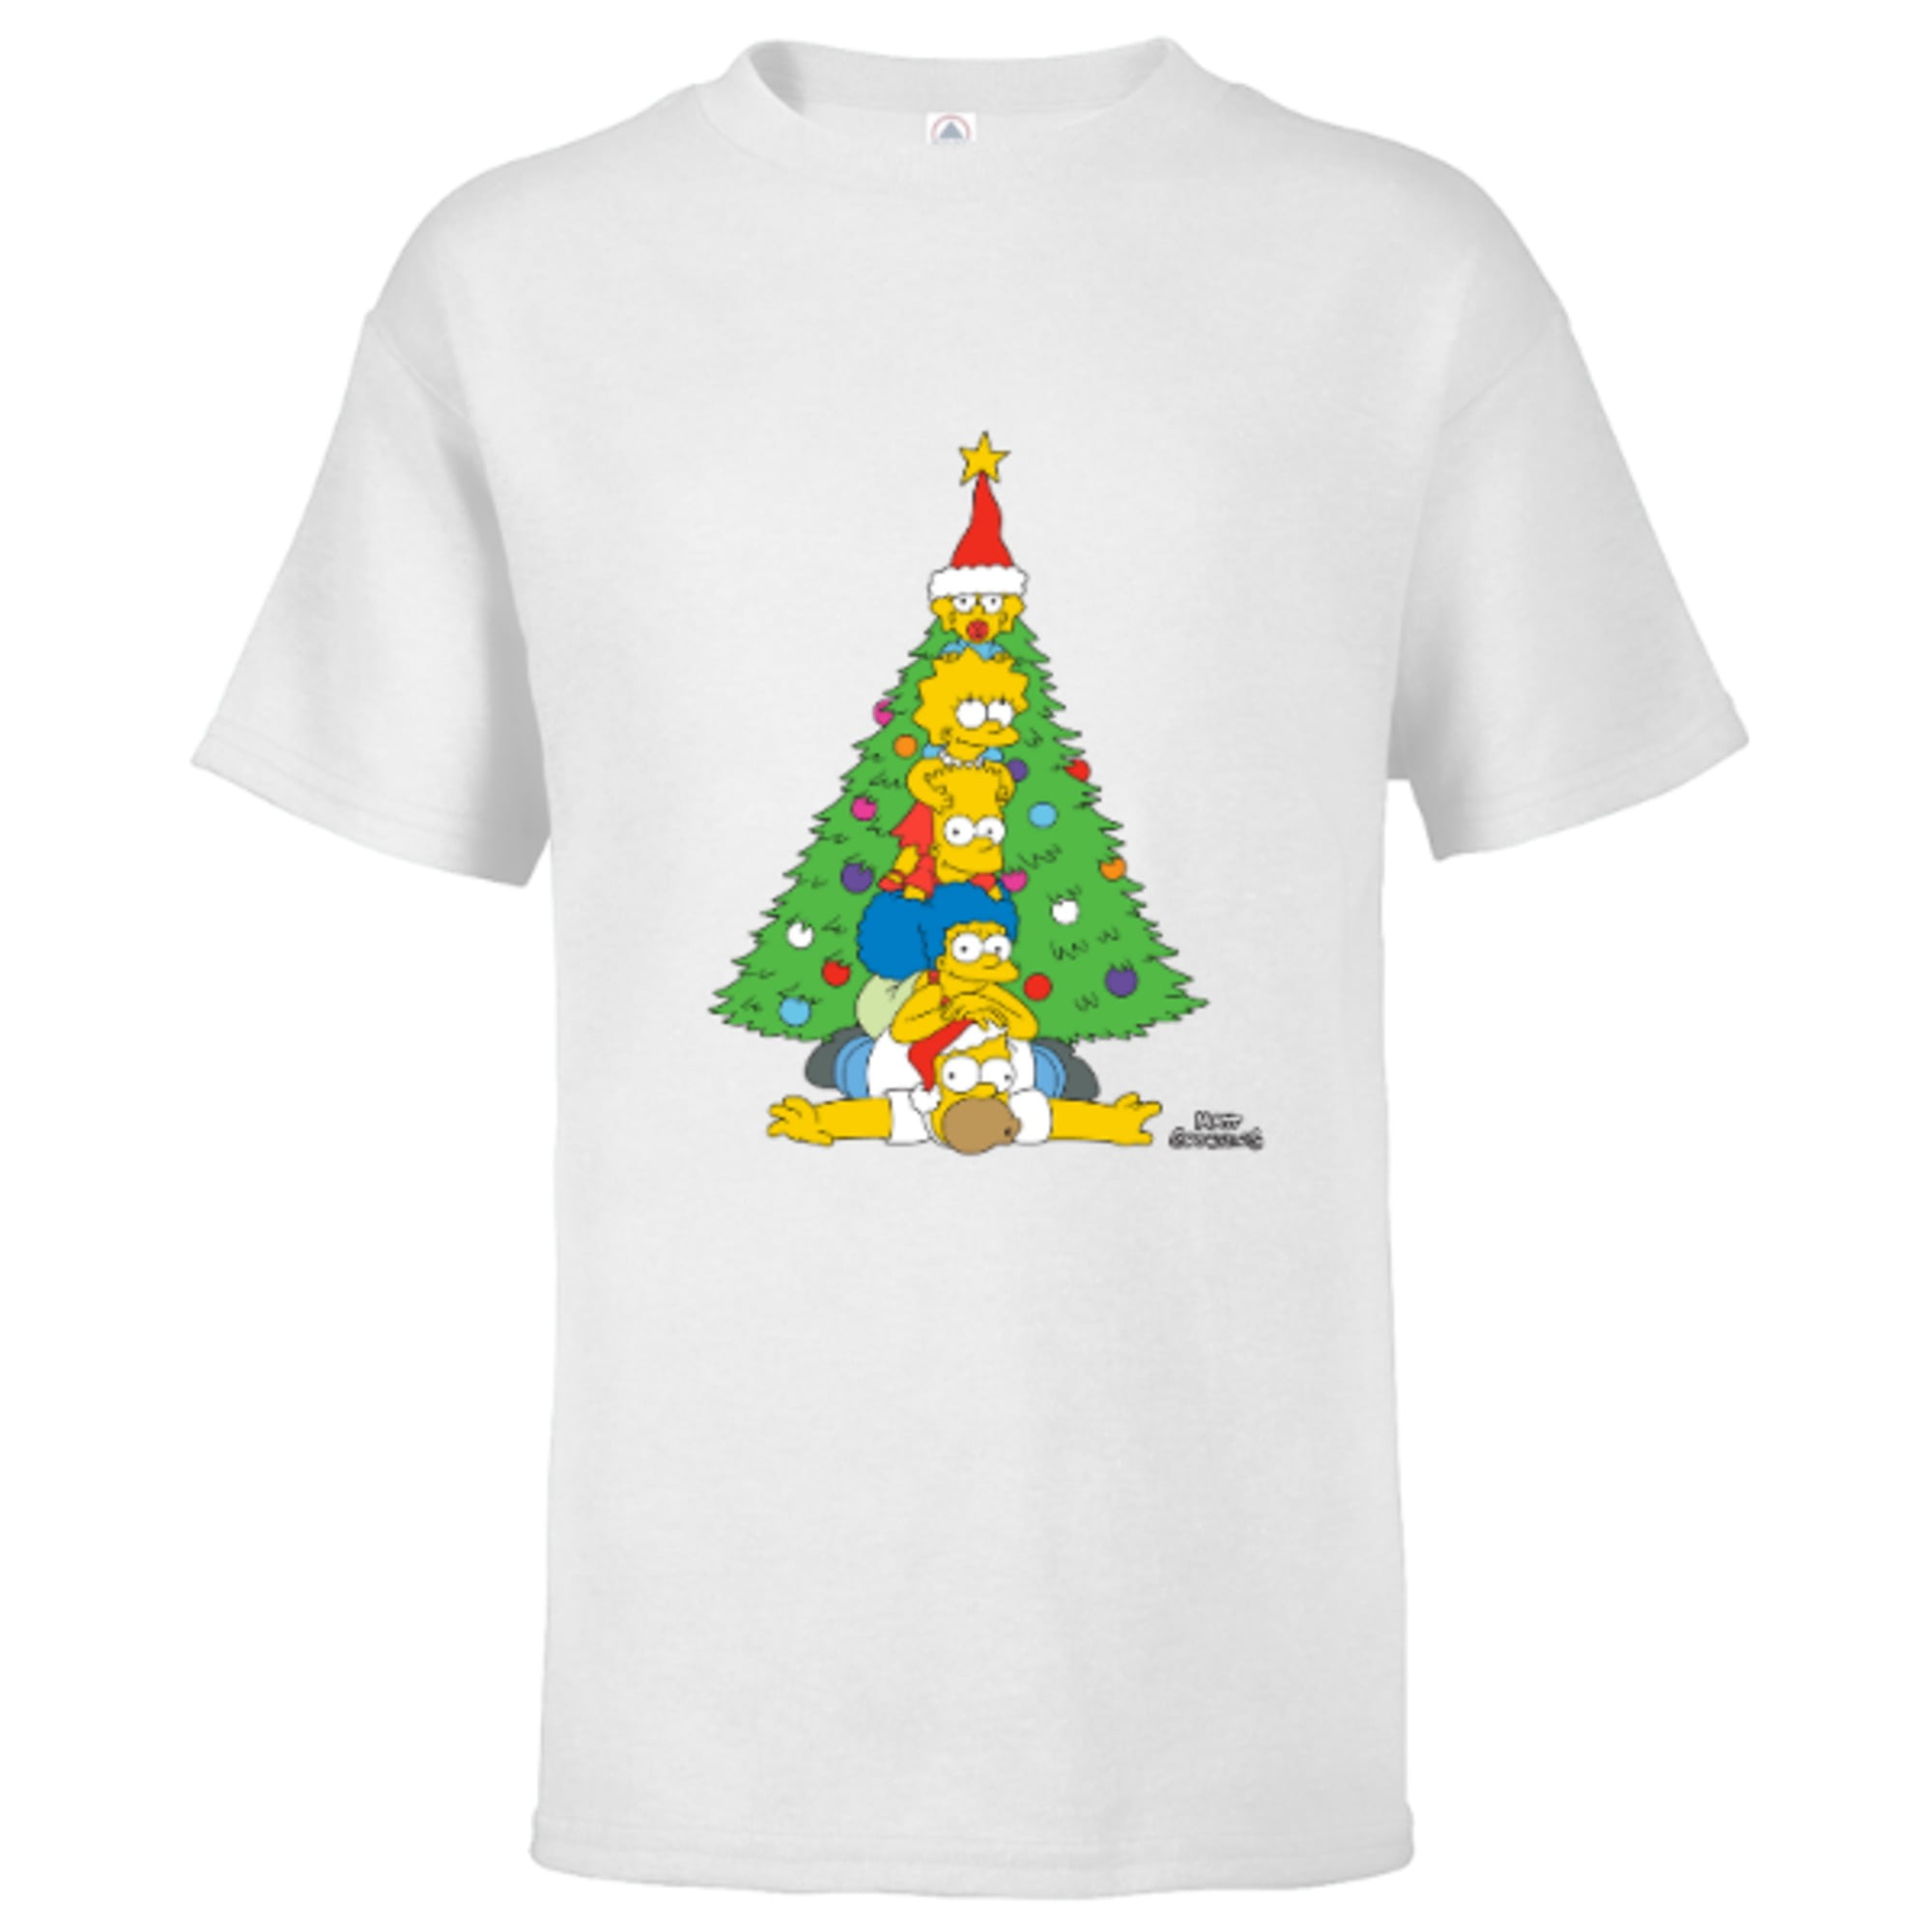 Family Simpsons - Kids Christmas Sleeve Short for – T-Shirt Pink Tree The Customized-Soft Holiday